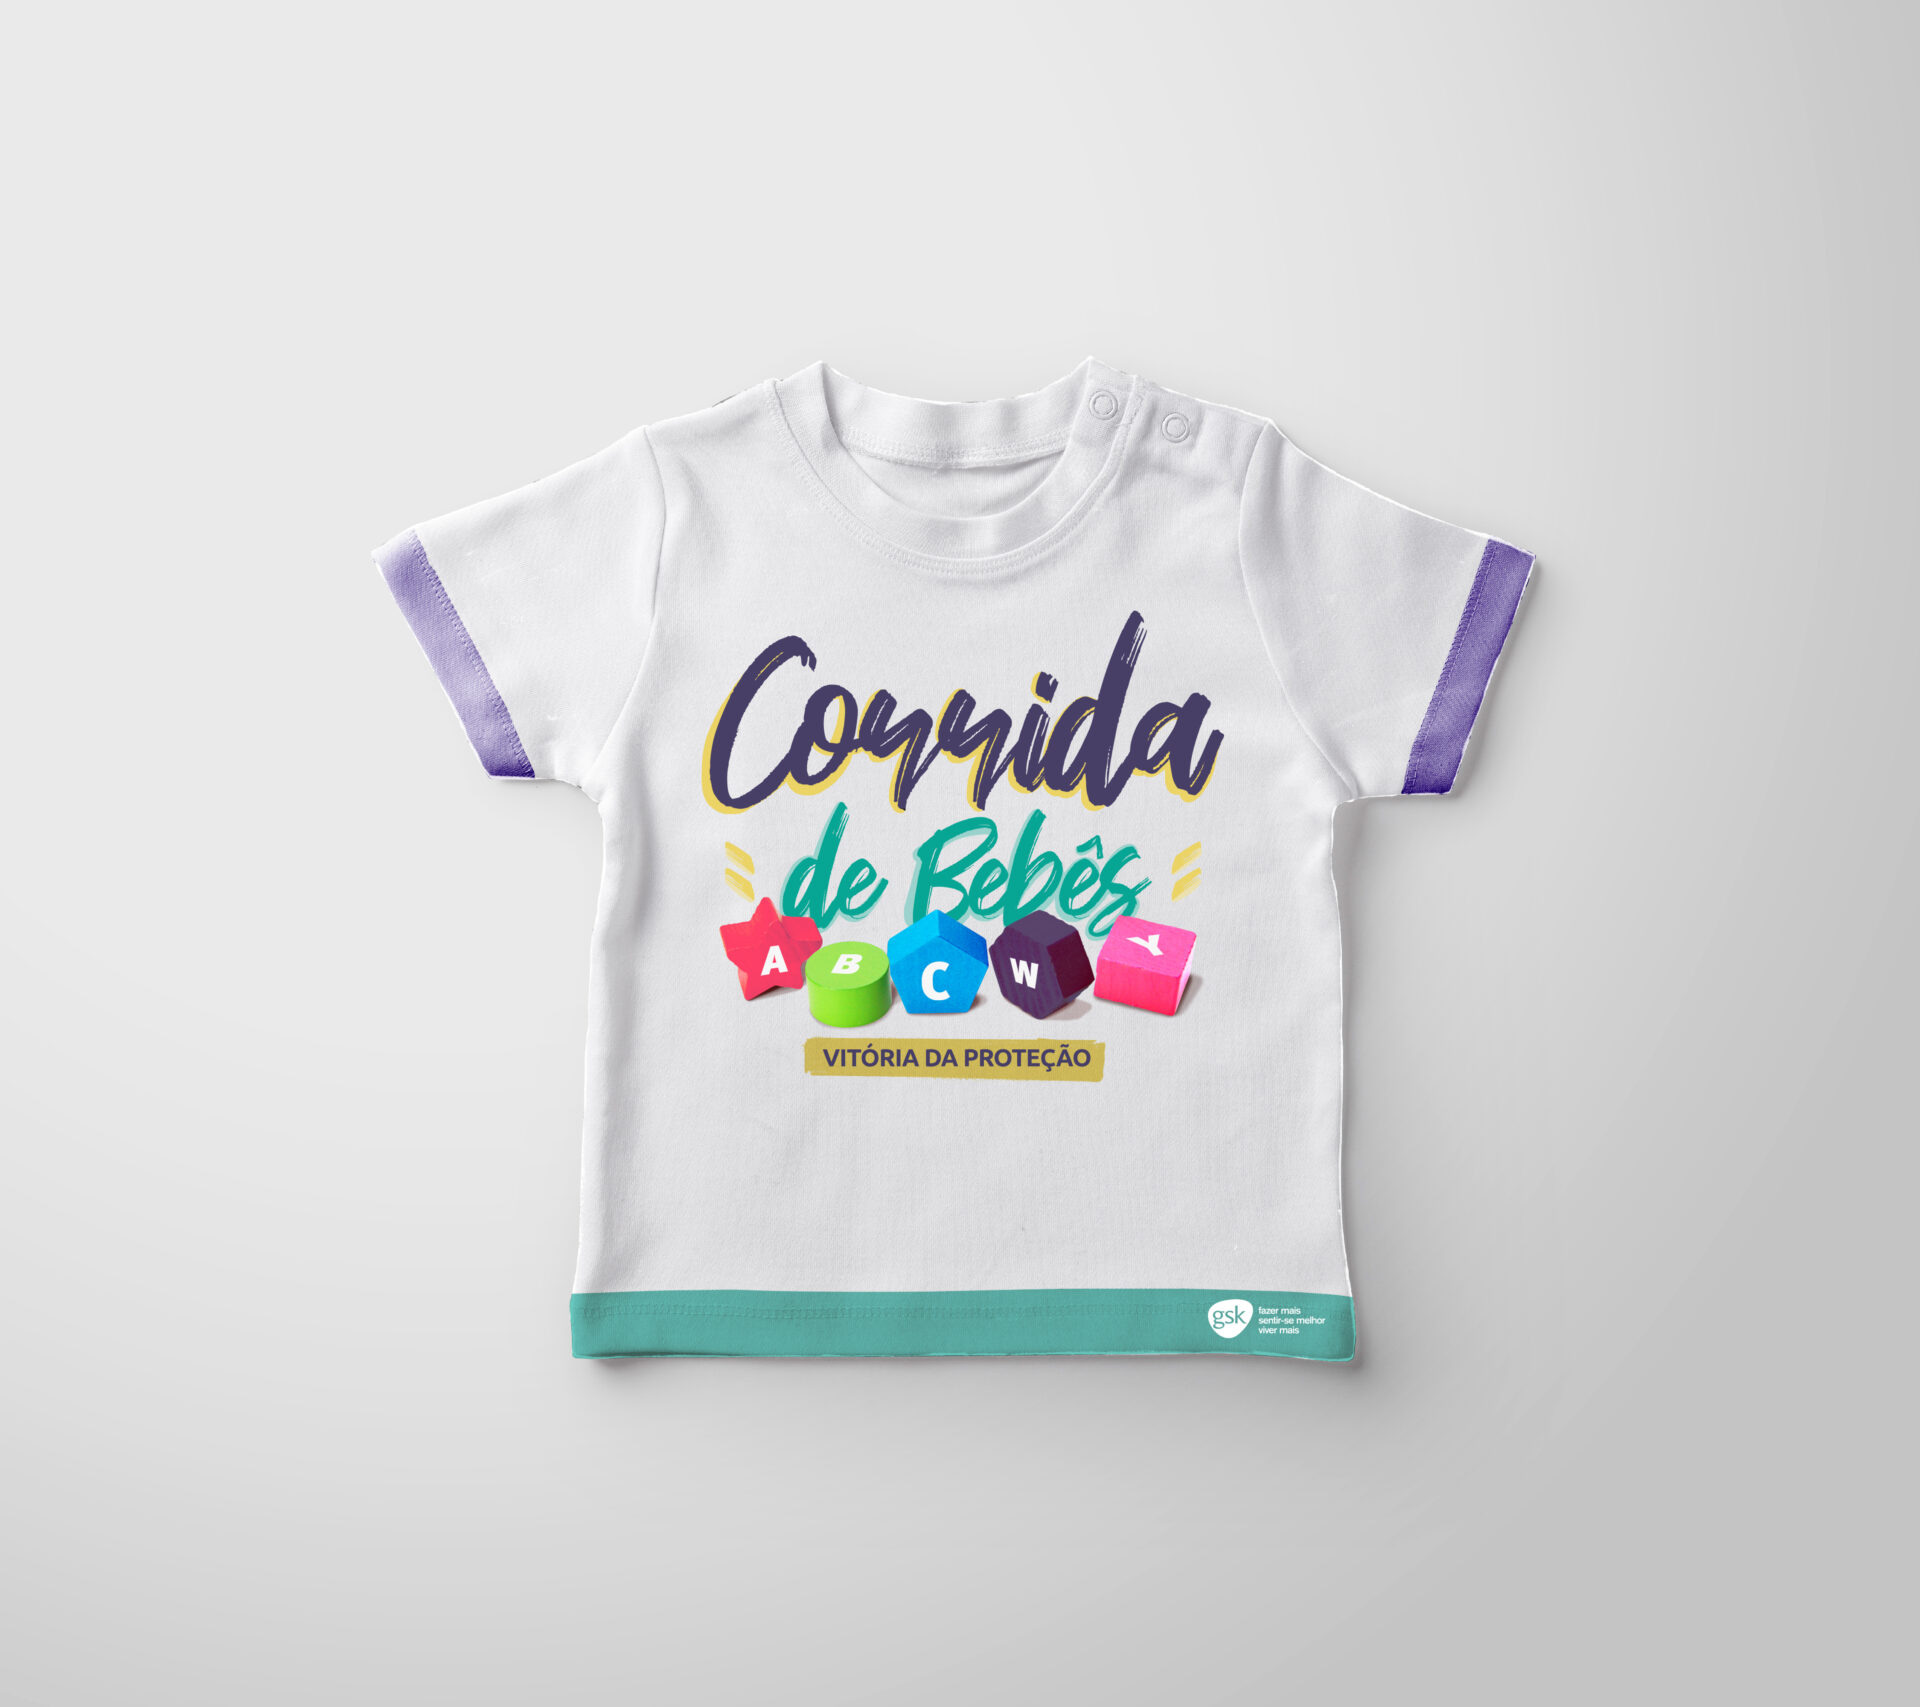 White T-shirt for Baby on Gray background for Mock up. ; Shutterstock ID 1335780512; Cliente/Job: -; CNPJ a Faturar: -; Vencimento da NF / Observa: -